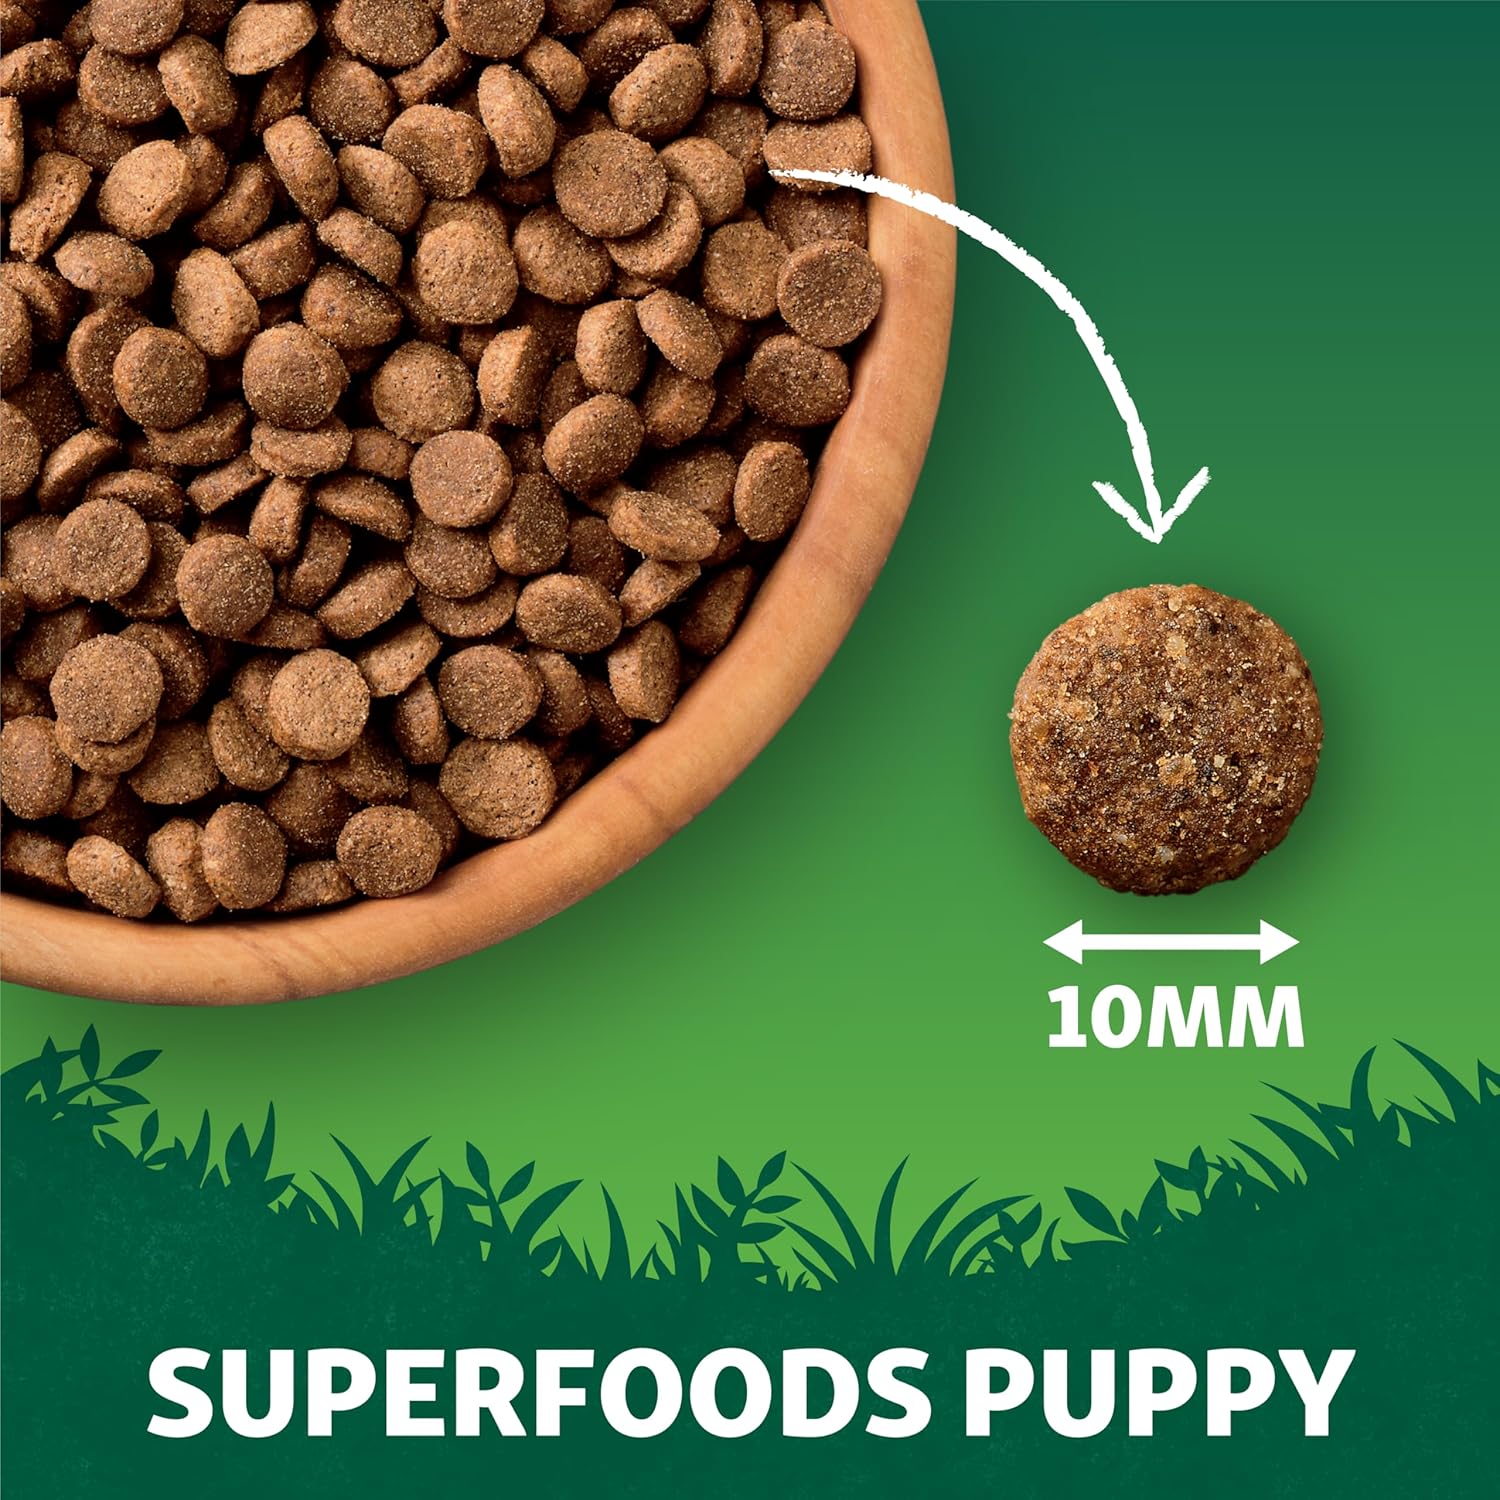 Harringtons Superfoods Puppy Complete Grain Free Hypoallergenic Chicken with Veg Dry Dog Food 1.7kg (Pack of 4) - Made with All Natural Ingredients :Pet Supplies